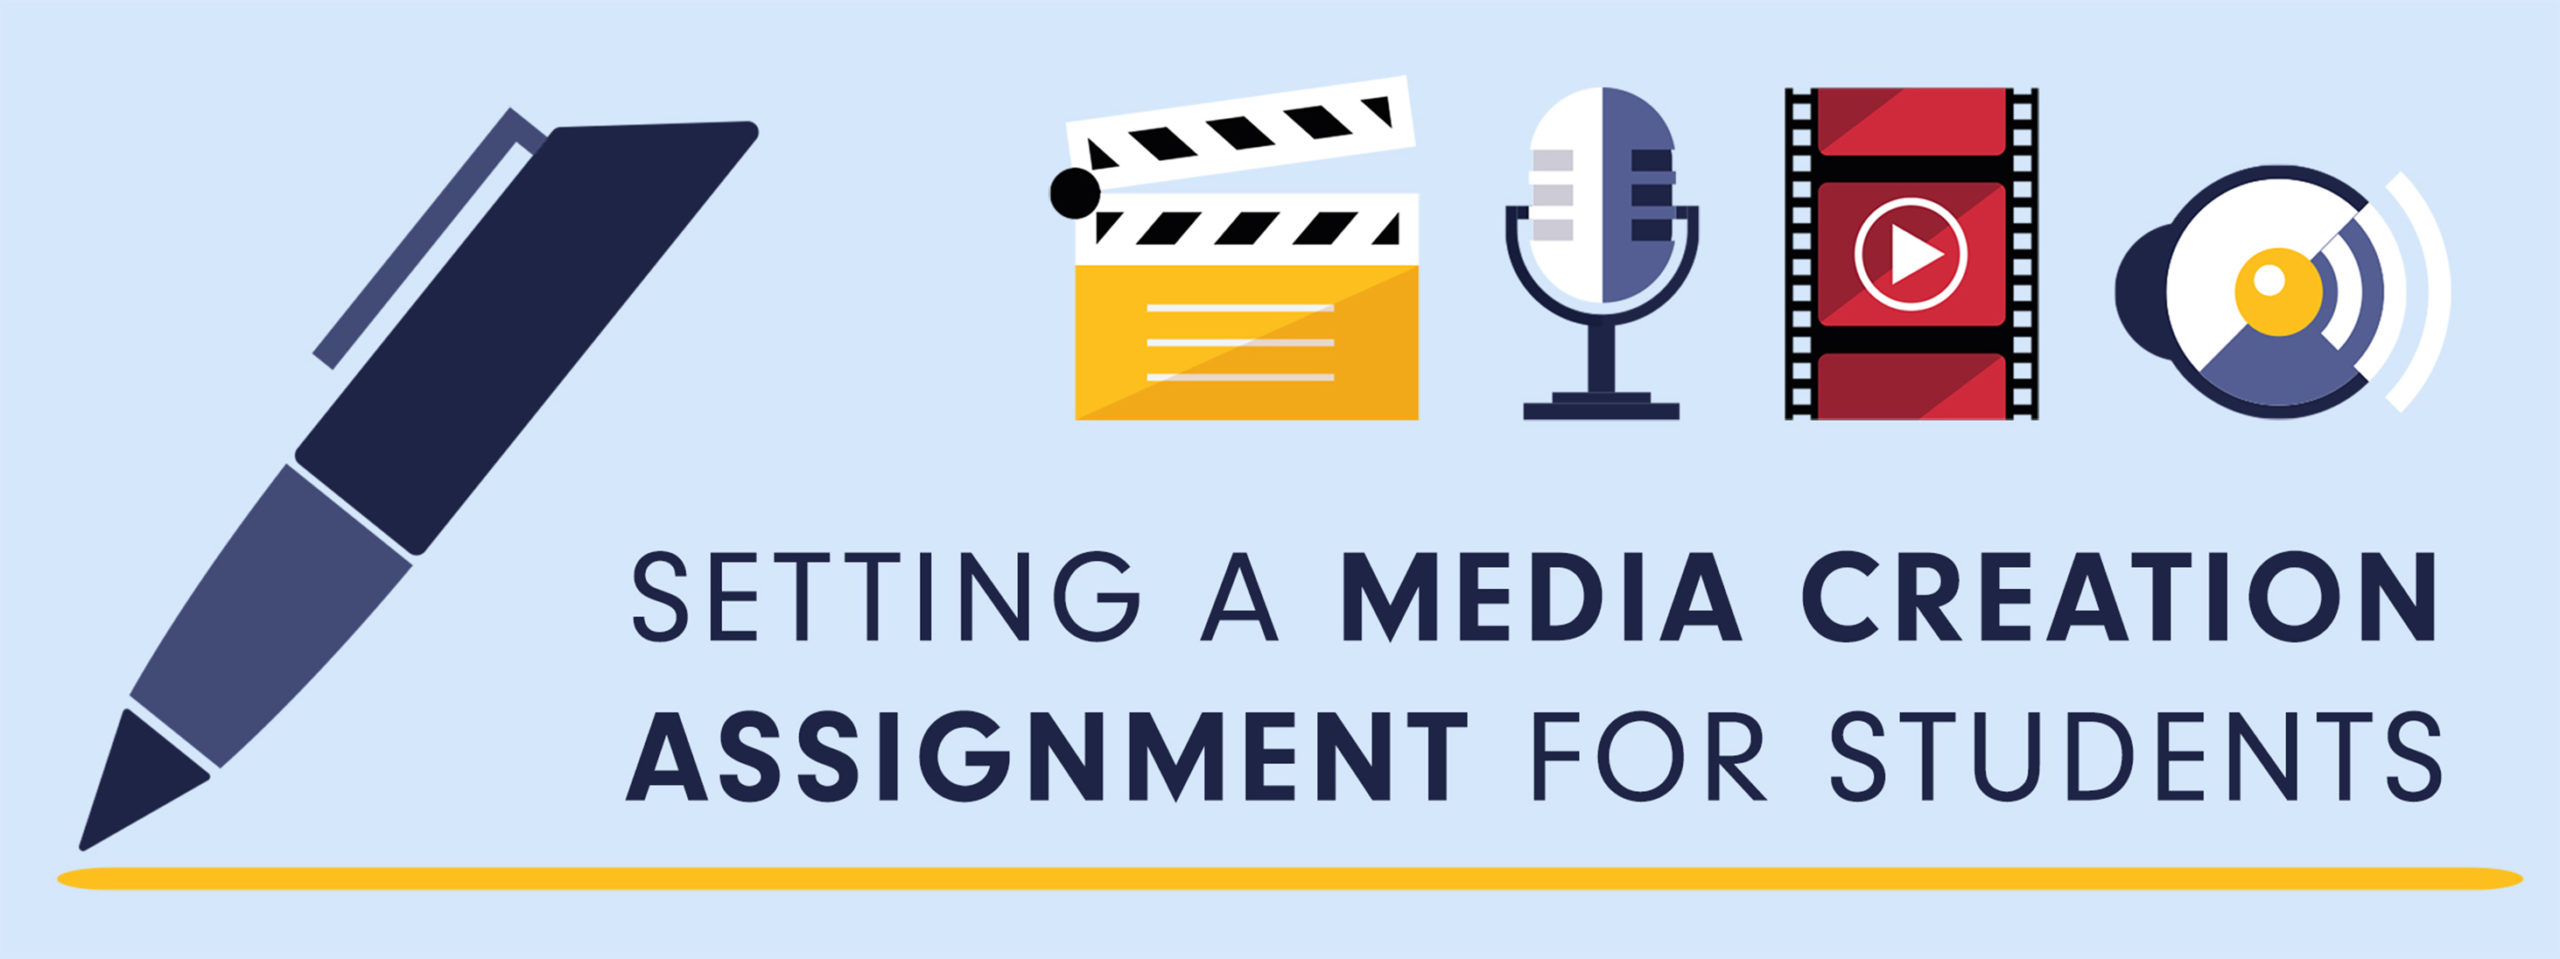 Setting a Media Creation Assignment for Students